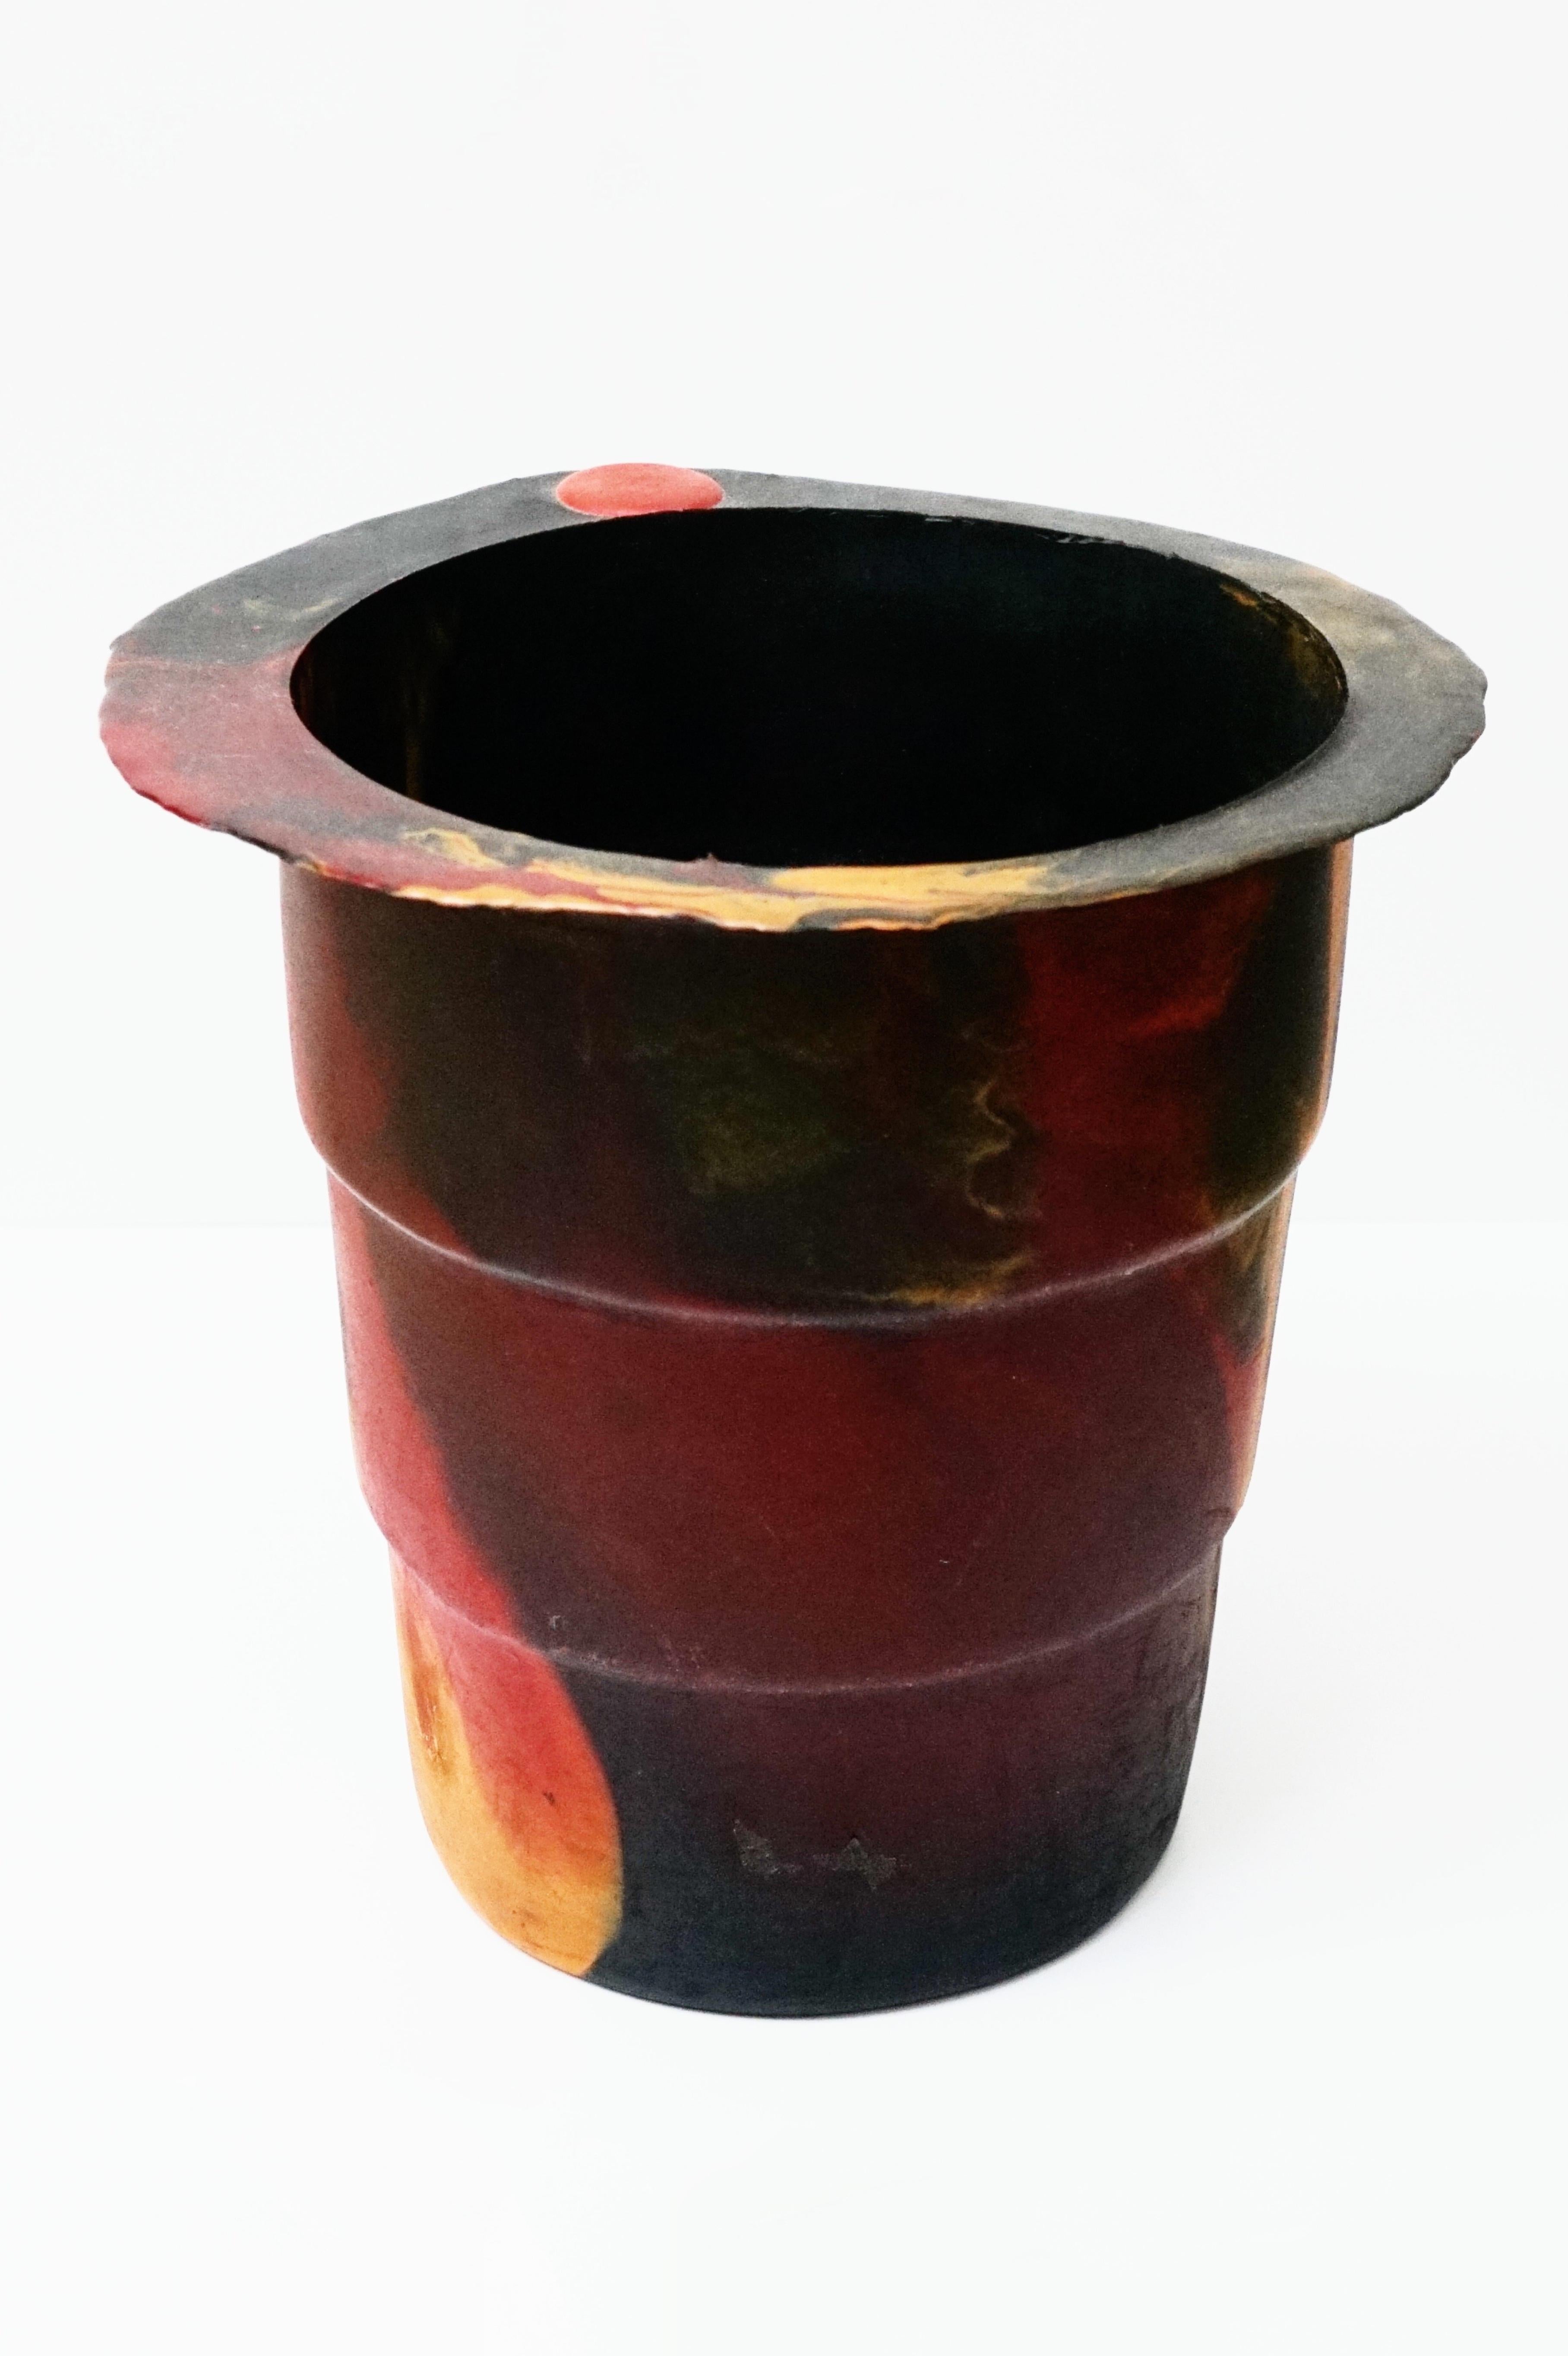 Limited edition 1990s flexible resin wine bucket by Gaetano Pesce for Fish Design, Italy.

Measures 12